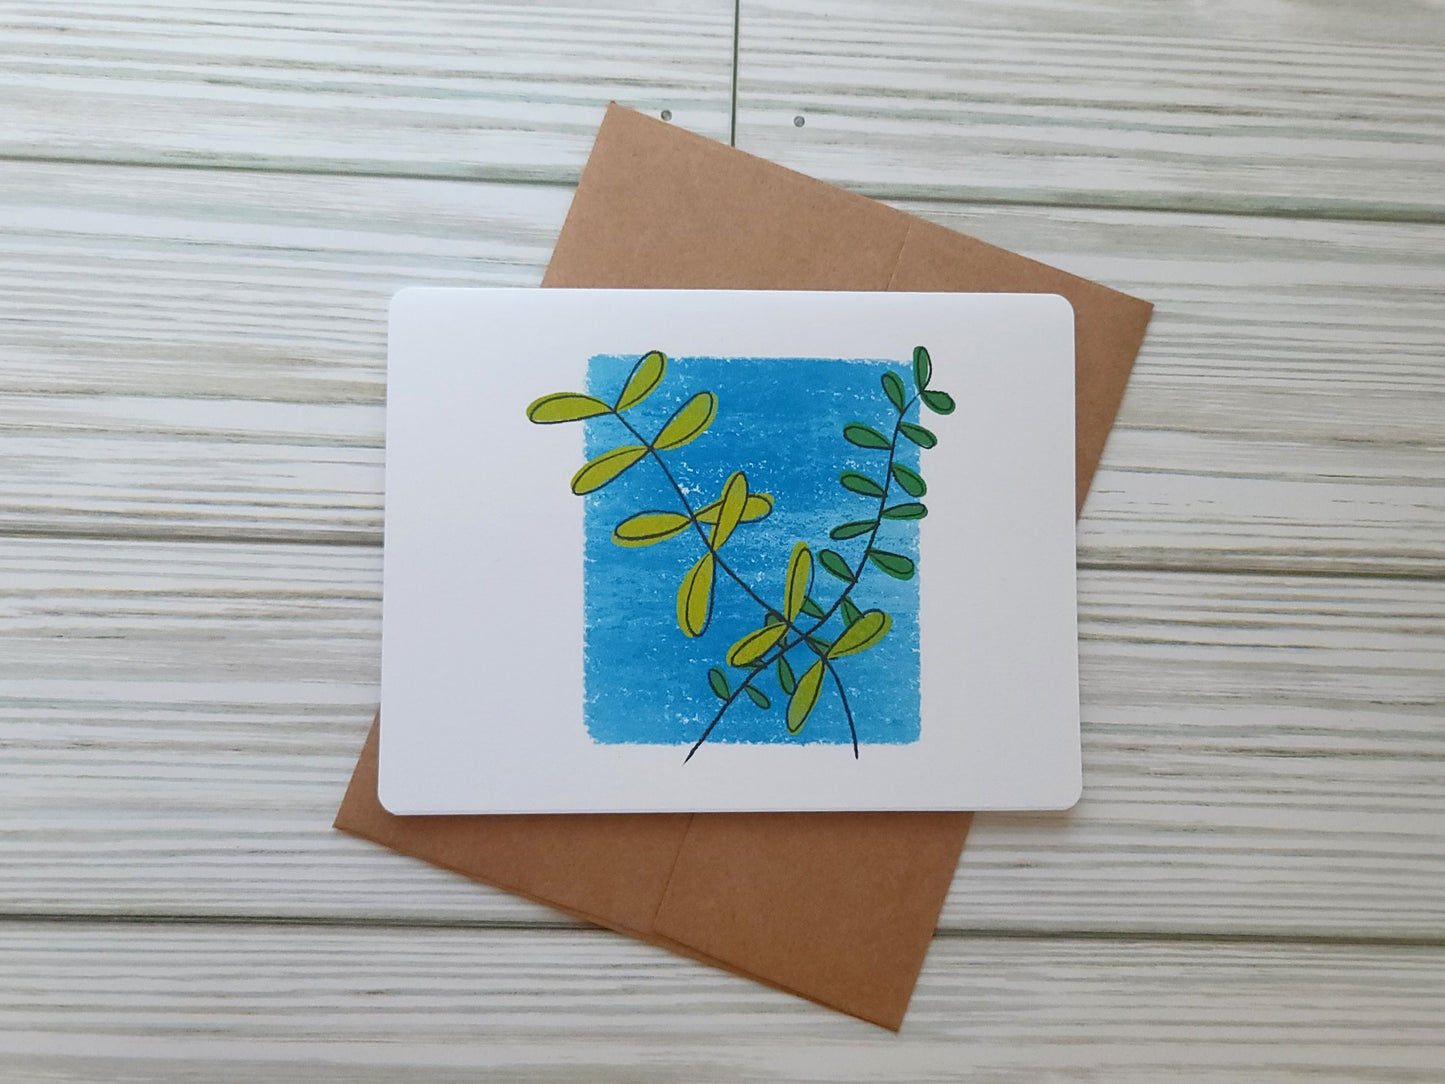 Plant Handmade Greeting Card - Recycled Paper and Kraft Paper - Landscape Overhead Shot